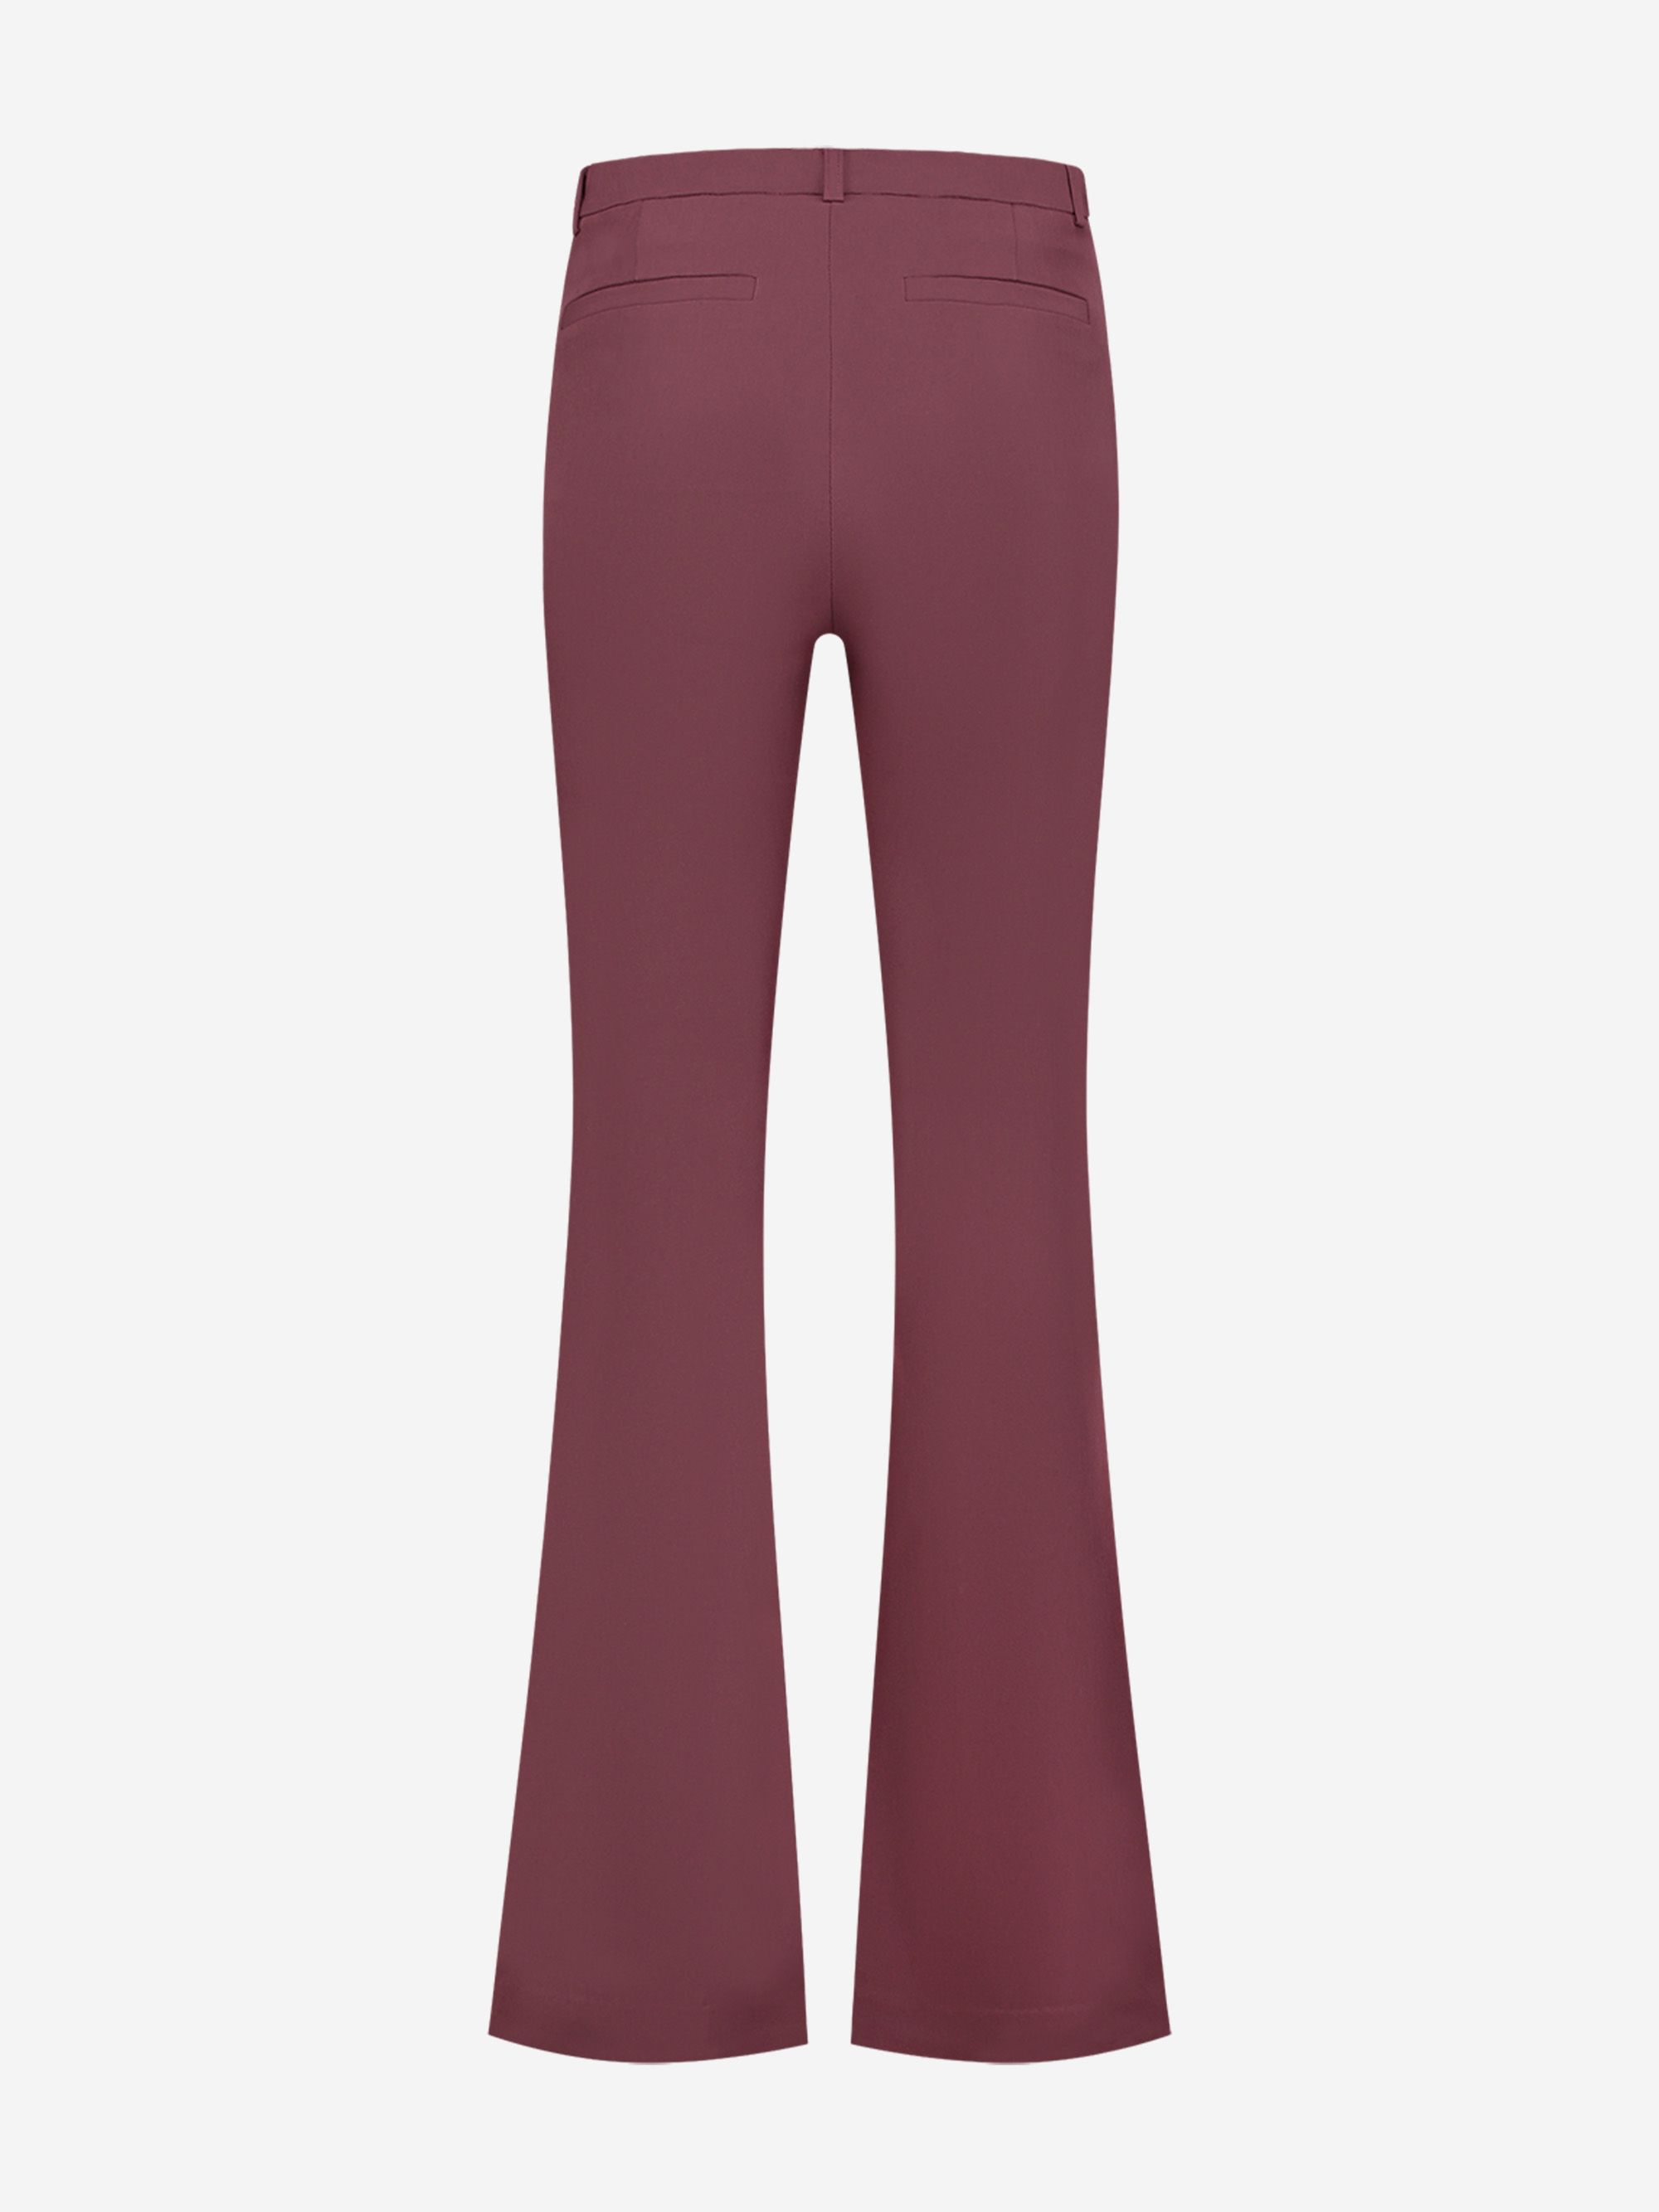 Flare pants with high rise